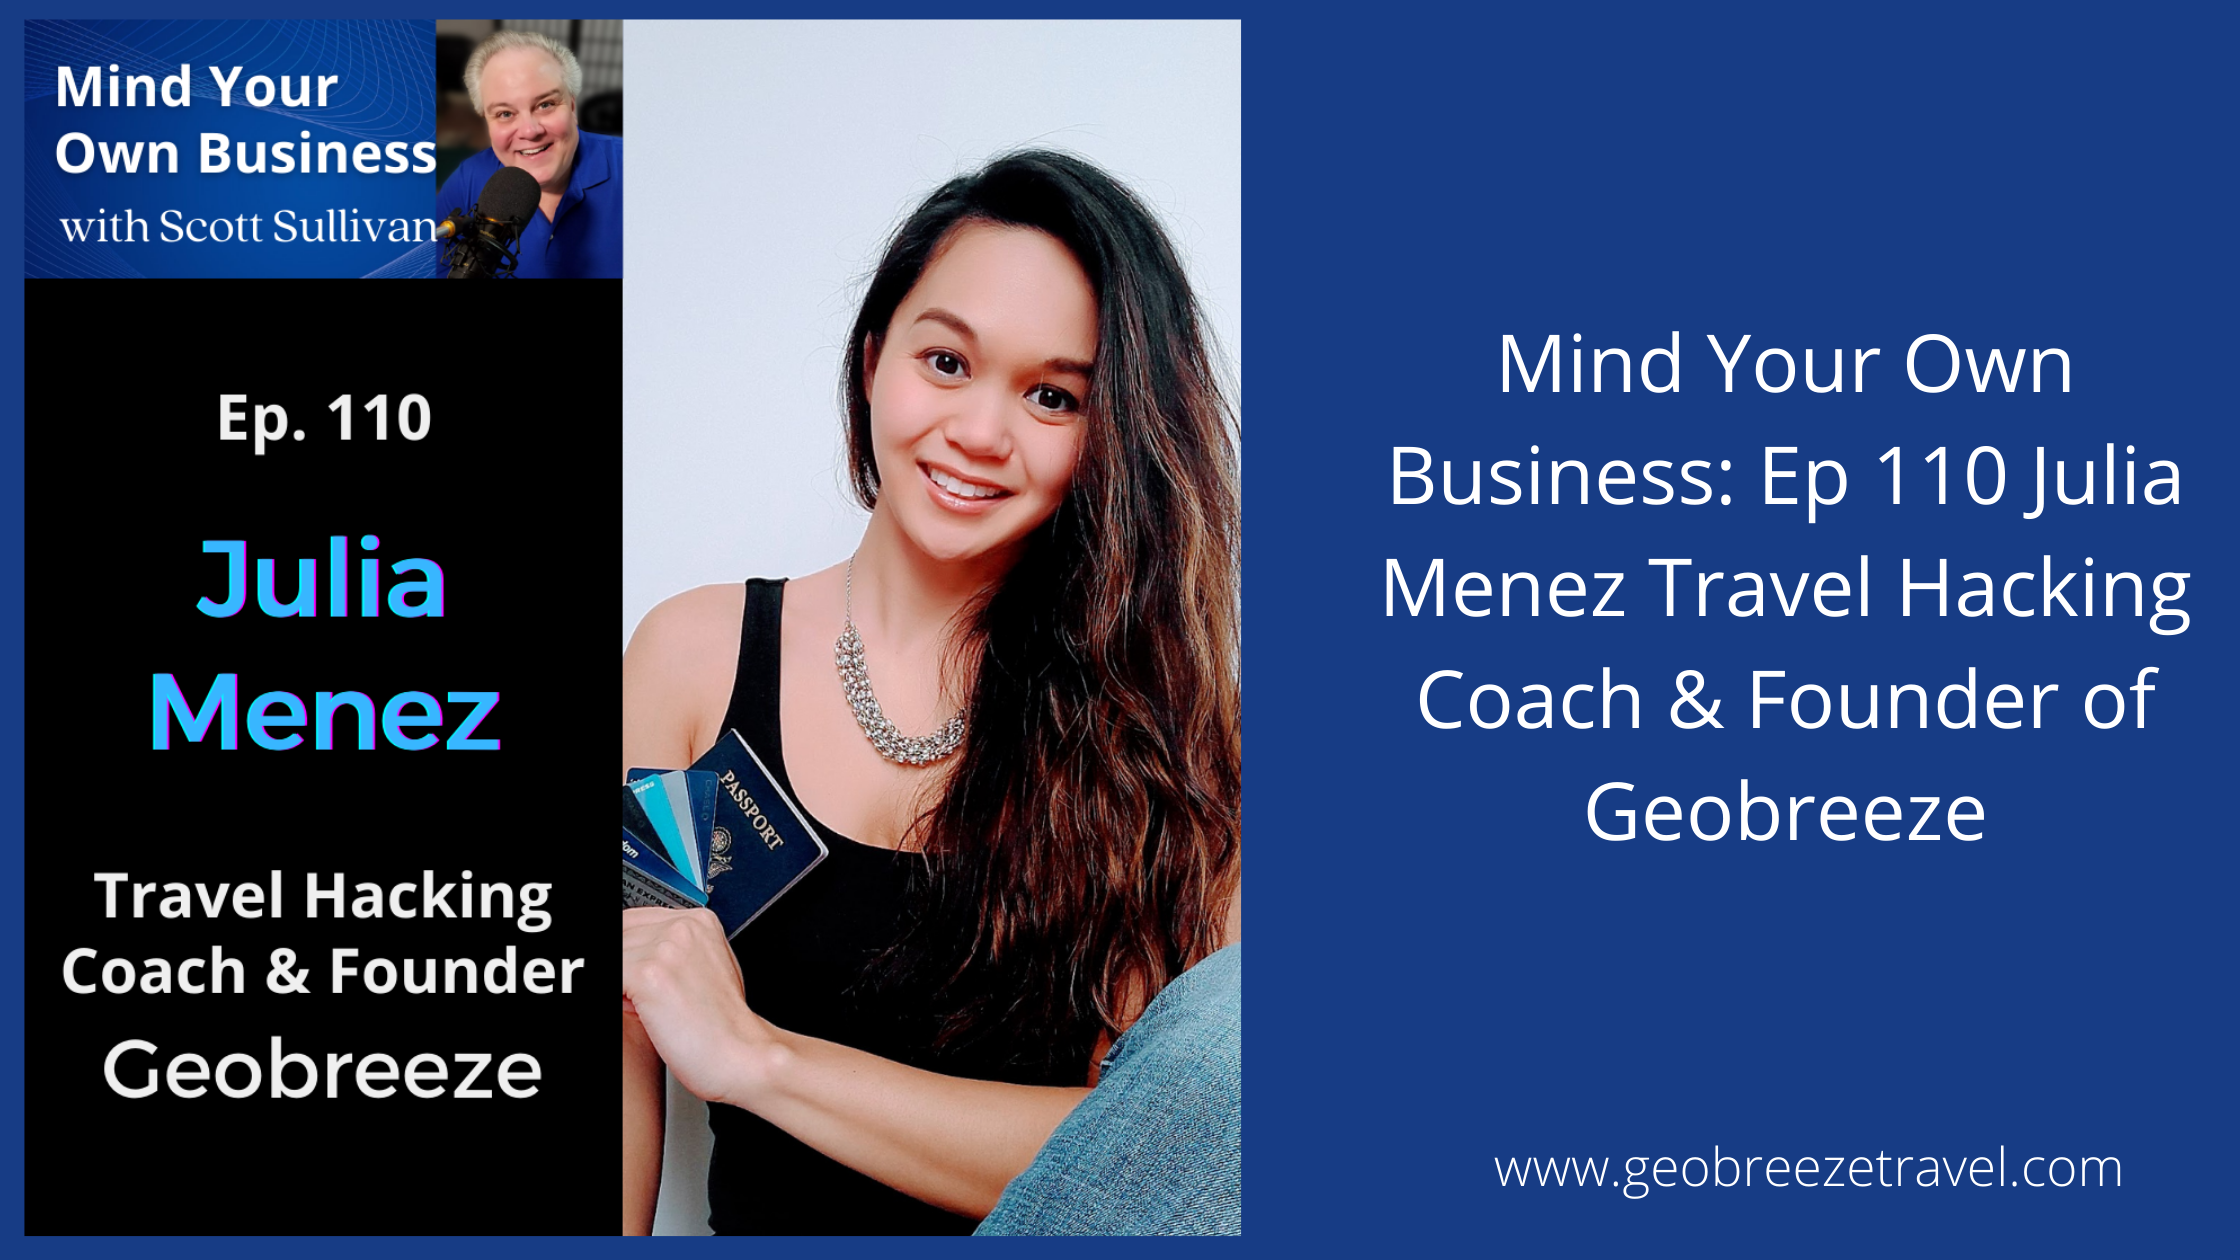 Podcast Feature: Mind Your Own Business with Scott Sullivan: Episode 110 Julia Menez Travel Hacking Coach and Founder Geobreeze